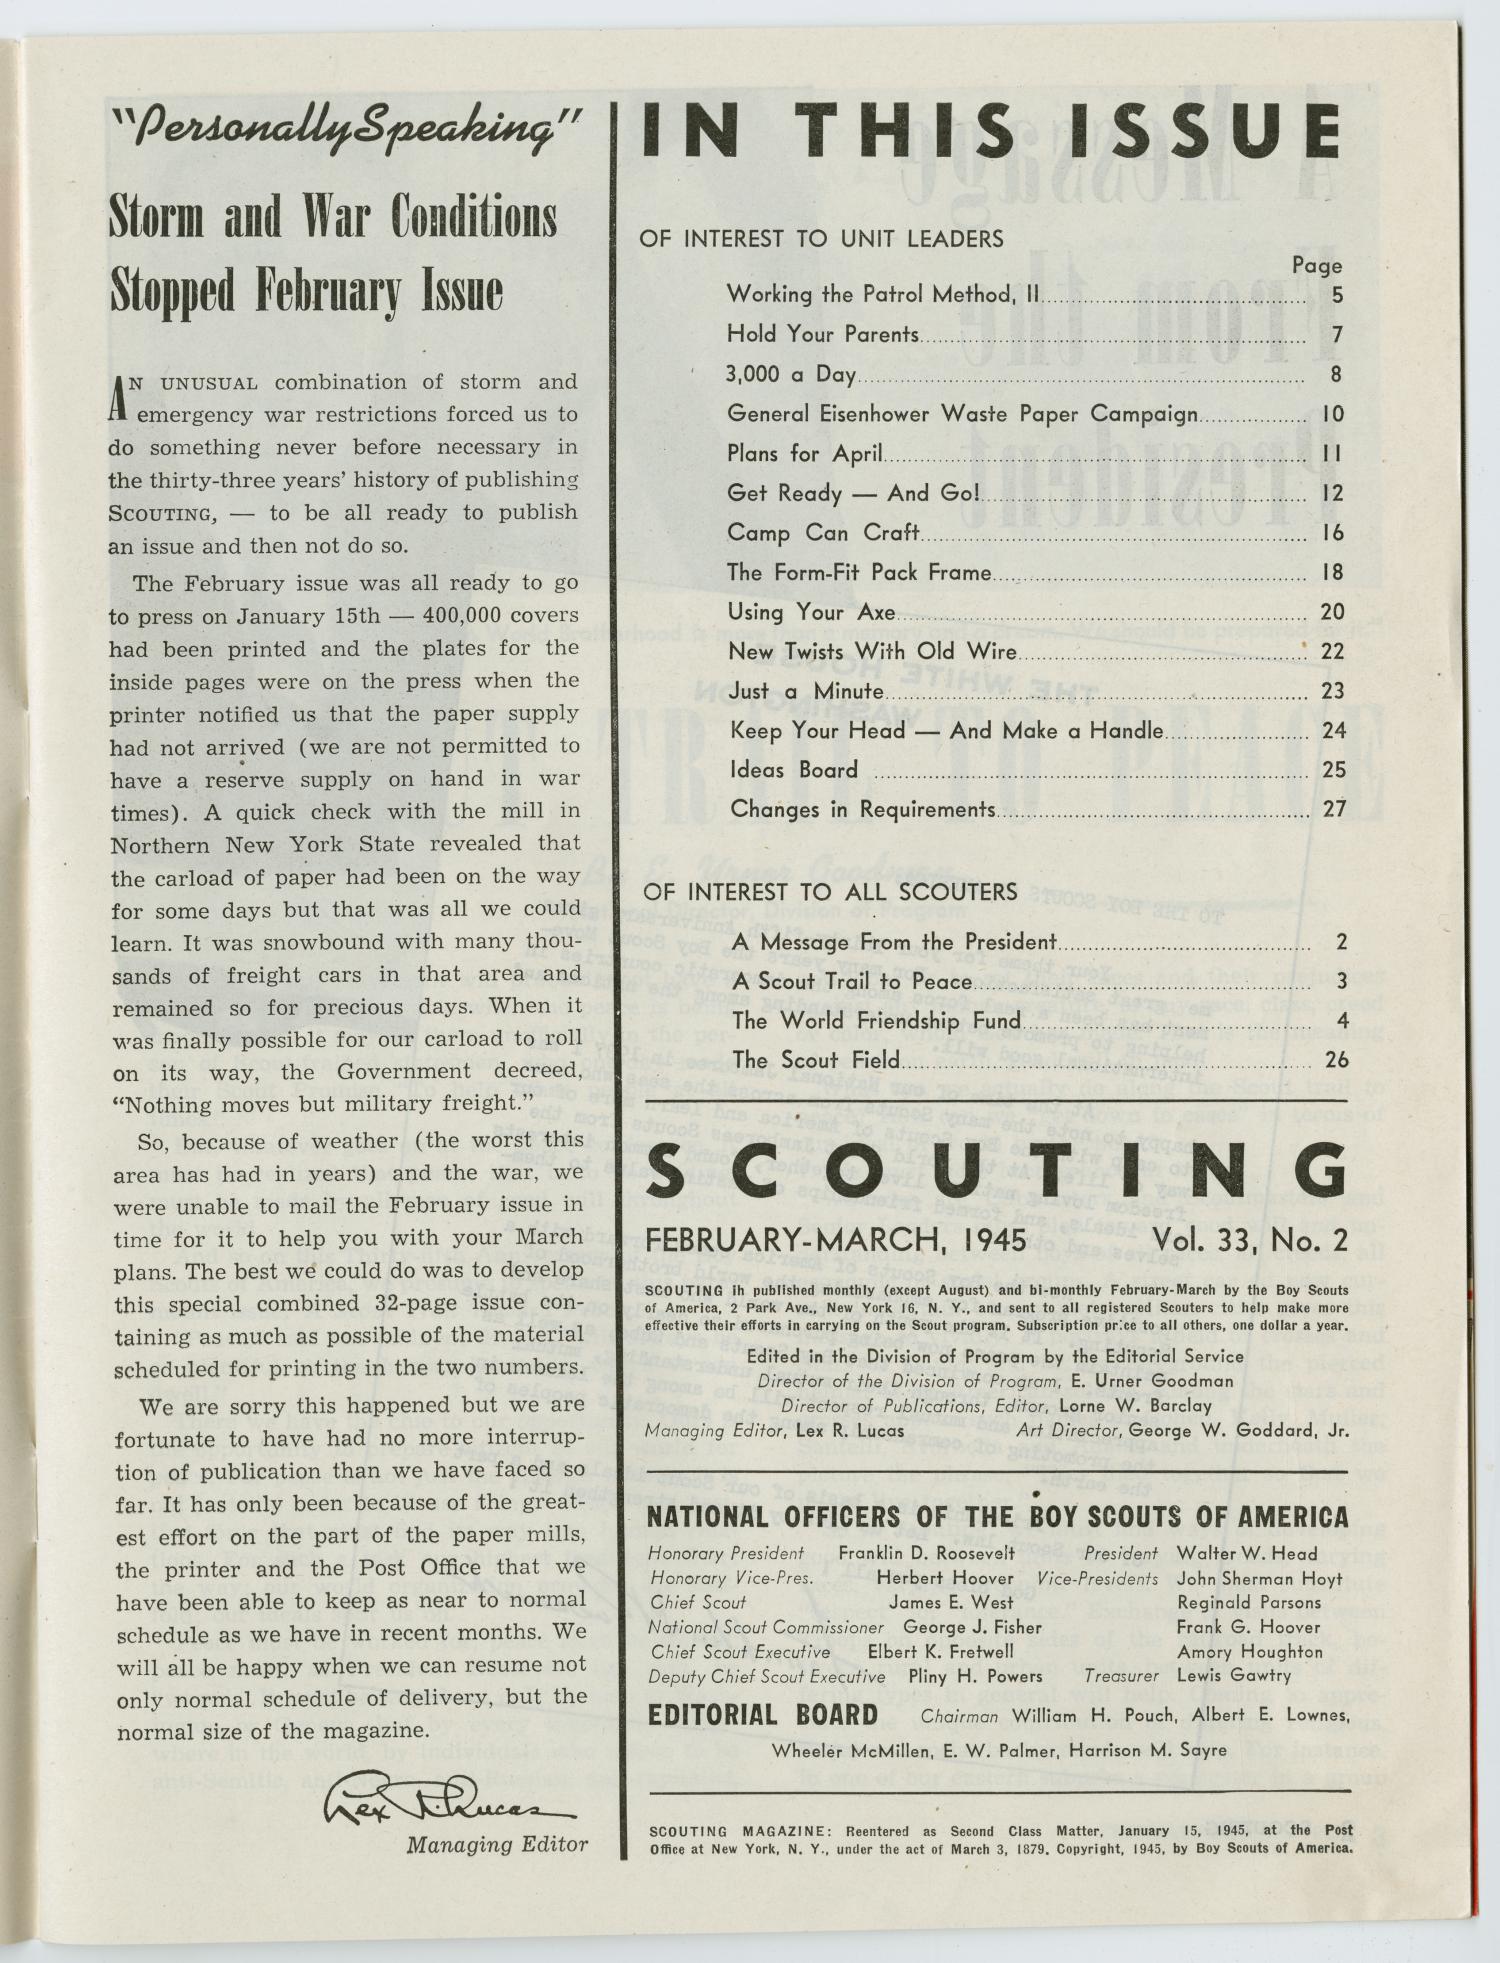 Scouting, Volume 33, Number 2, February-March 1945
                                                
                                                    1
                                                